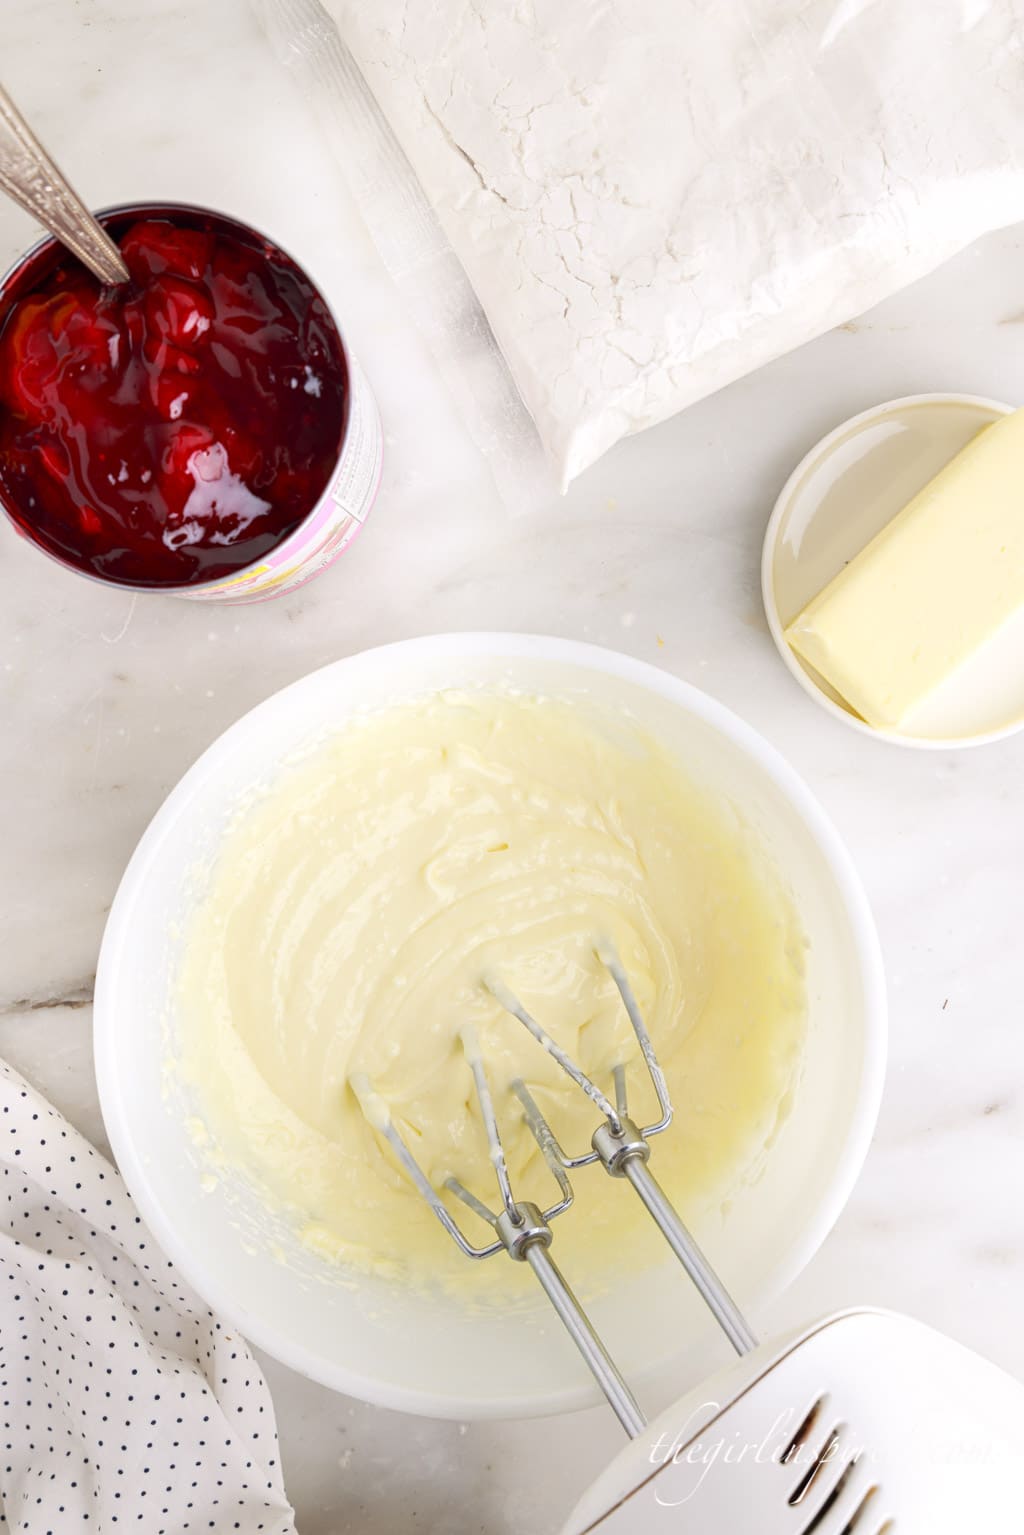 cream cheese mixture beaten together in white mixing bowl.